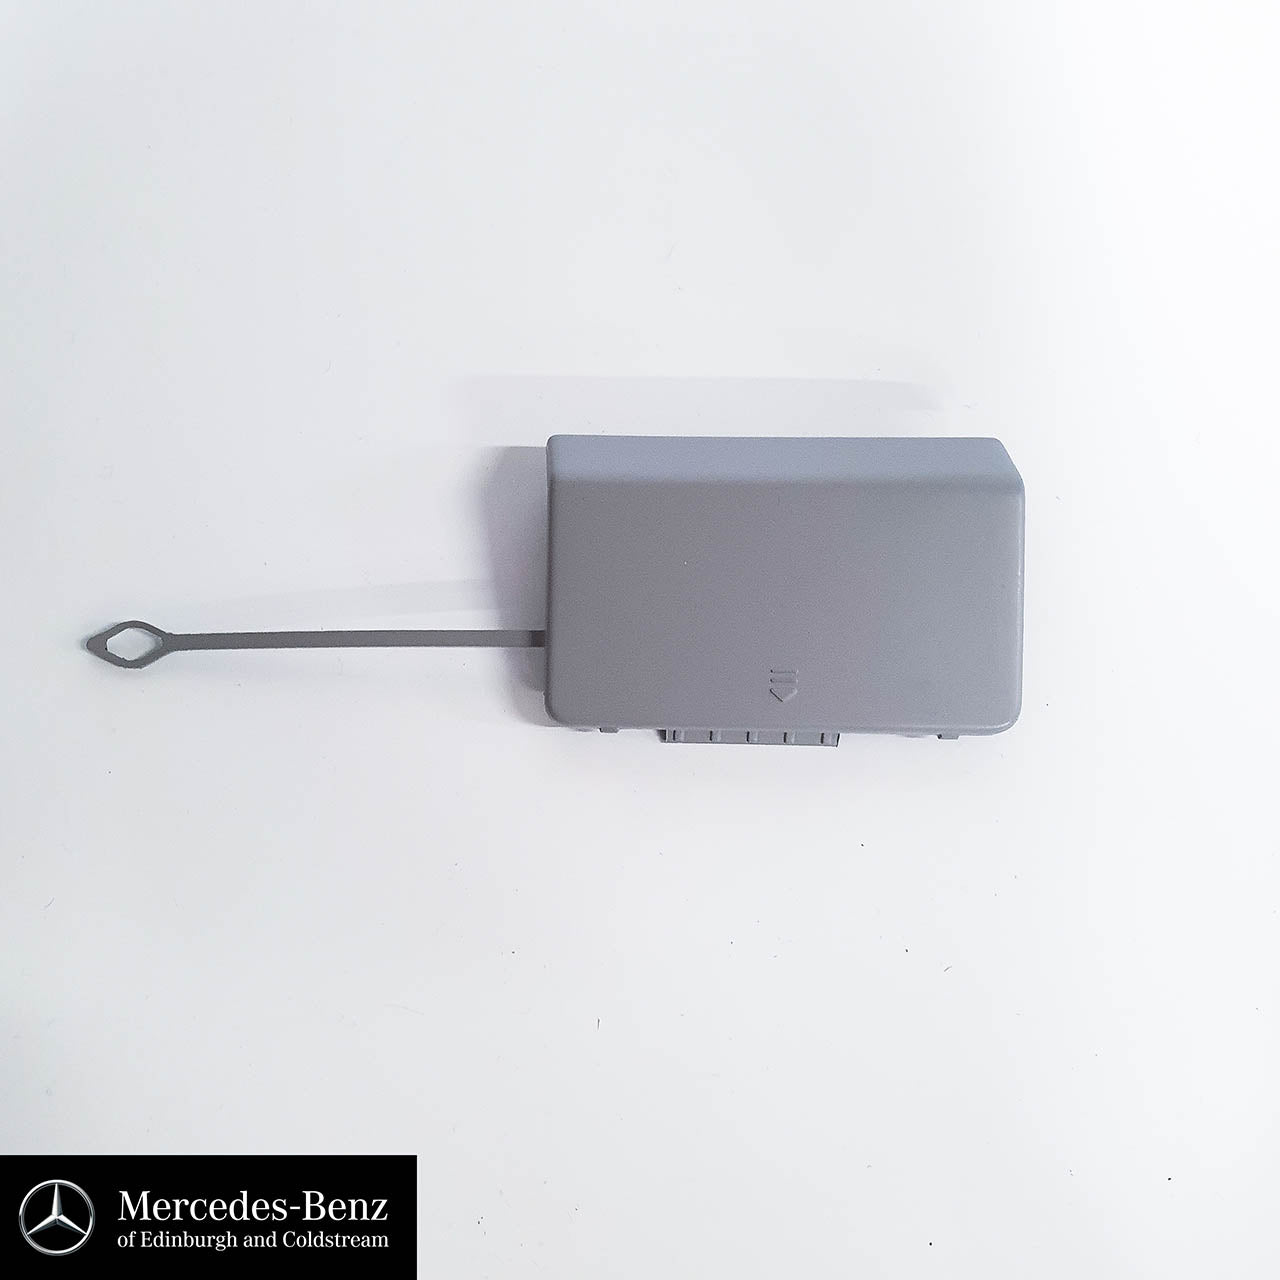 Genuine Mercedes-Benz rear tow hook cover – Mercedes Genuine Parts